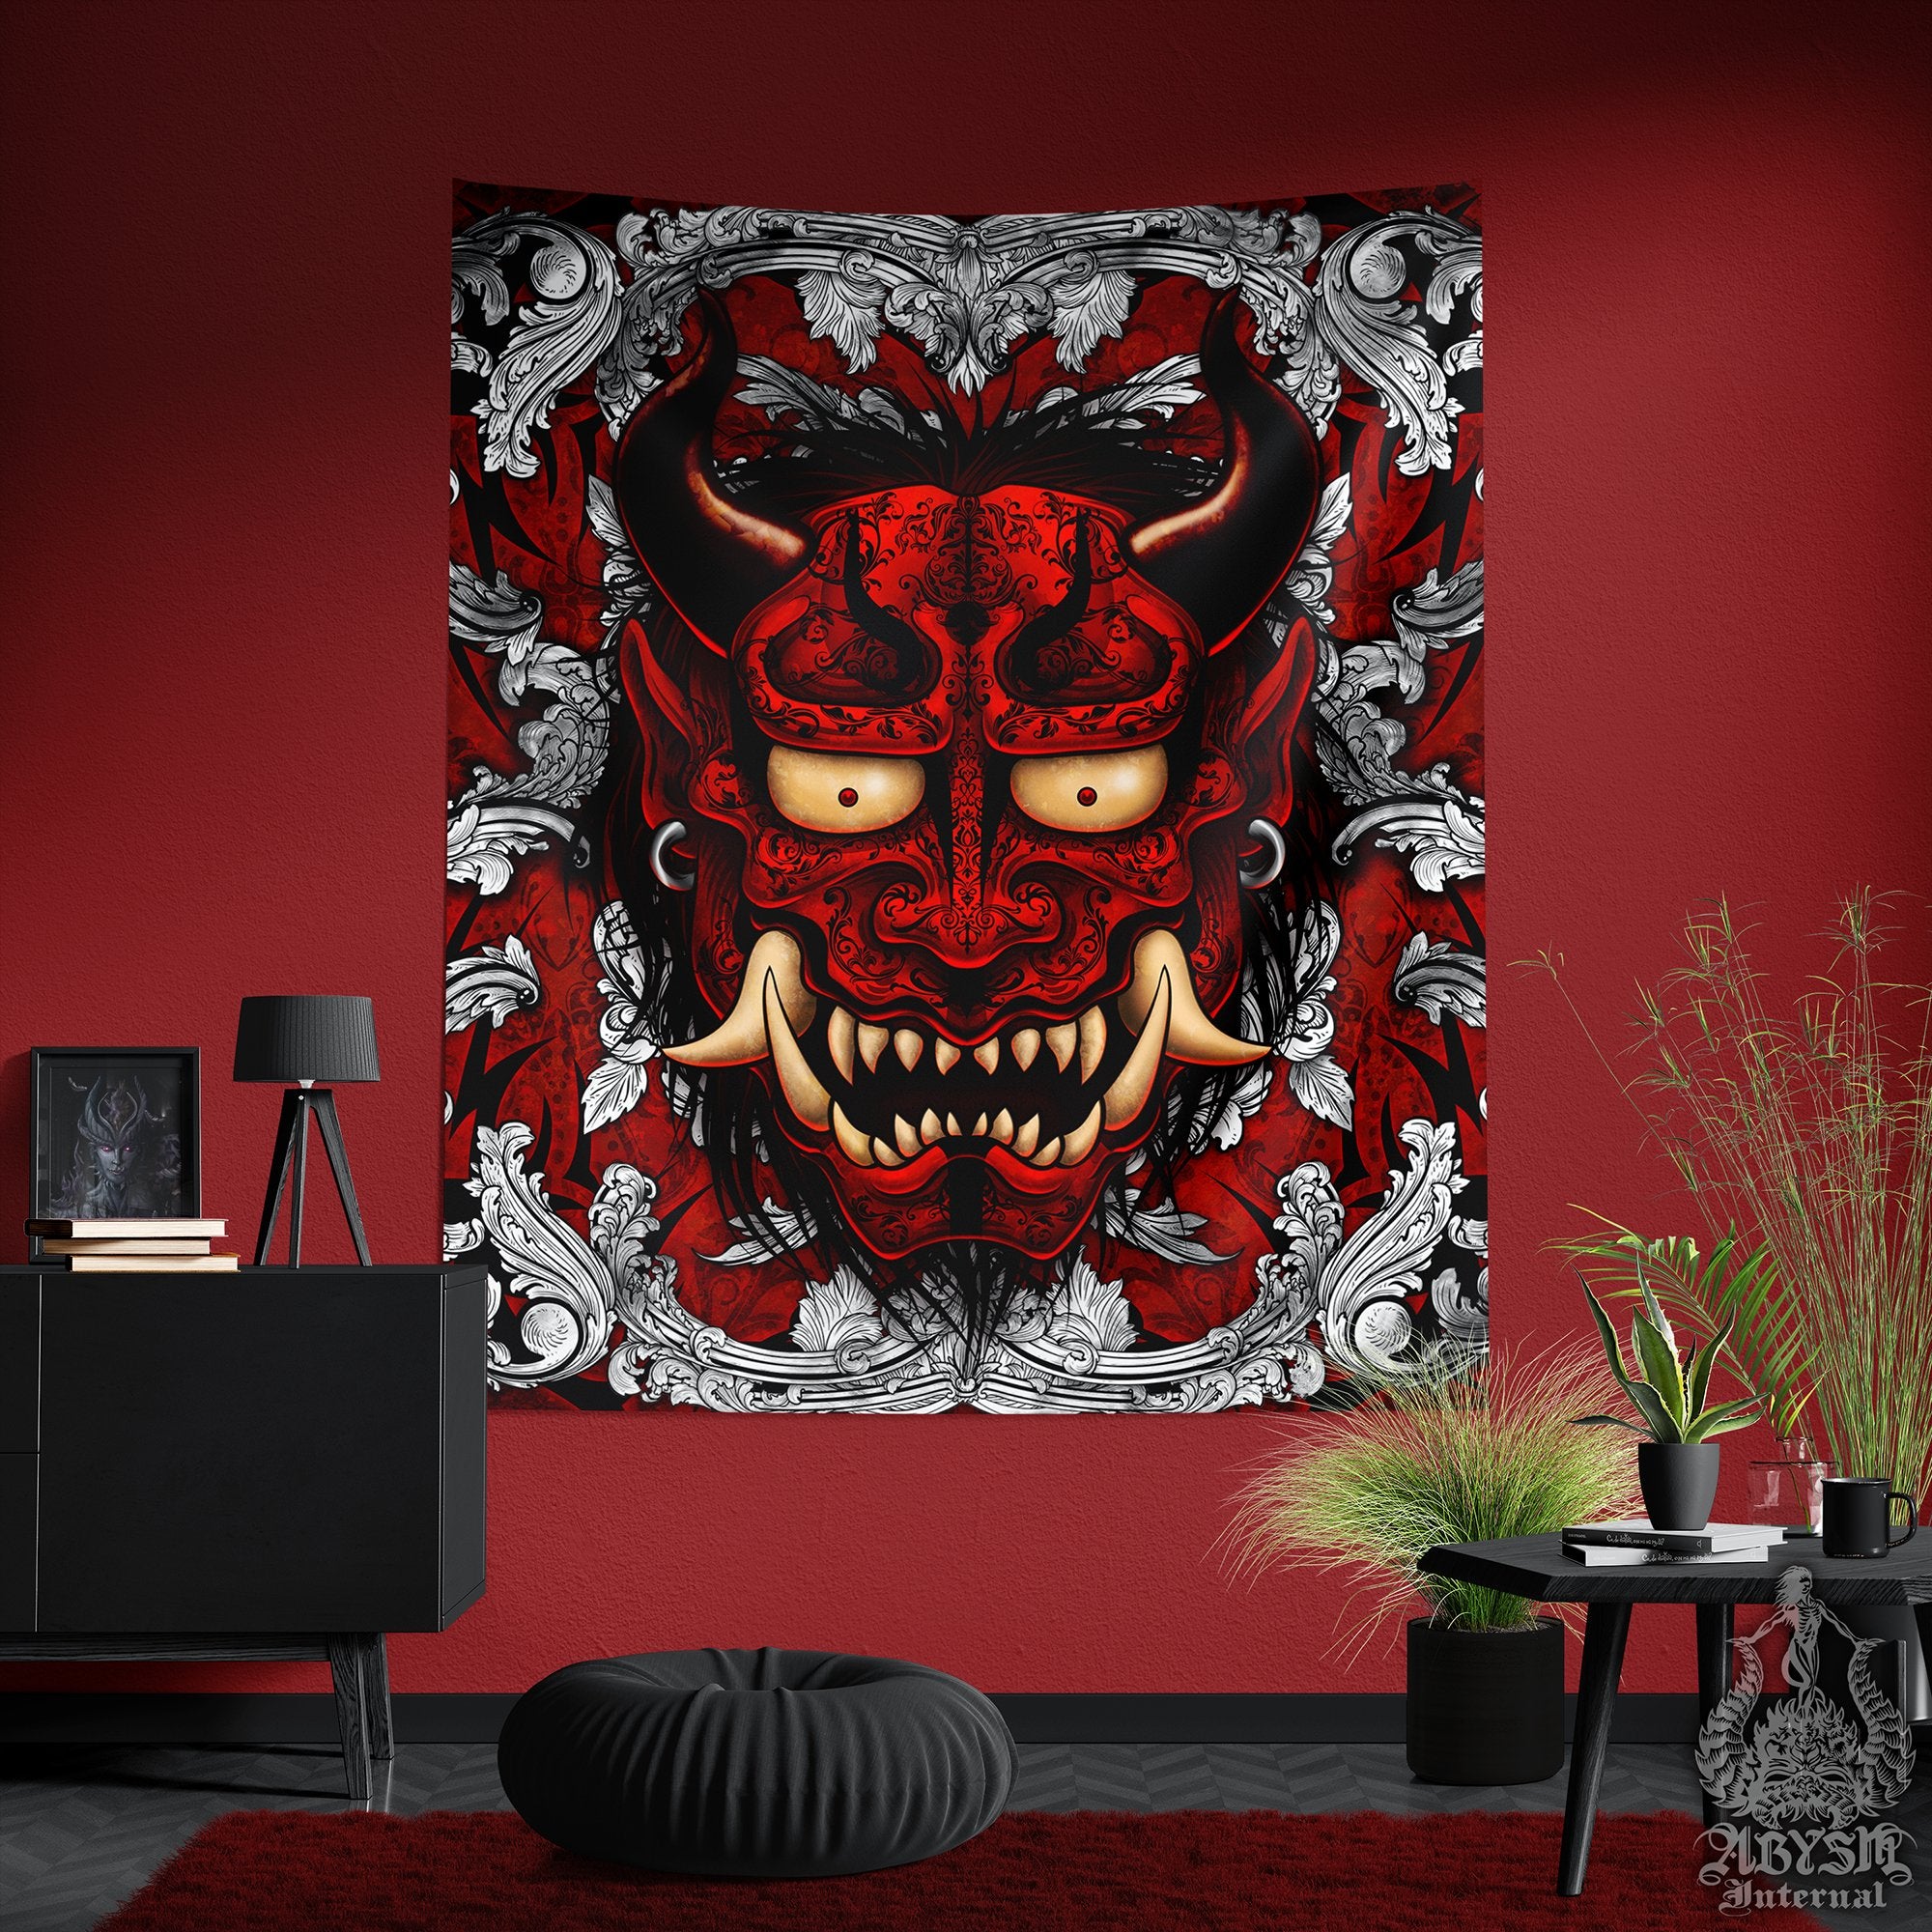 Silver Oni Tapestry, Goth Wall Hanging, Japanese Demon, Gamer Home Decor, Vertical Art Print - Black and Red, 2 Colors - Abysm Internal